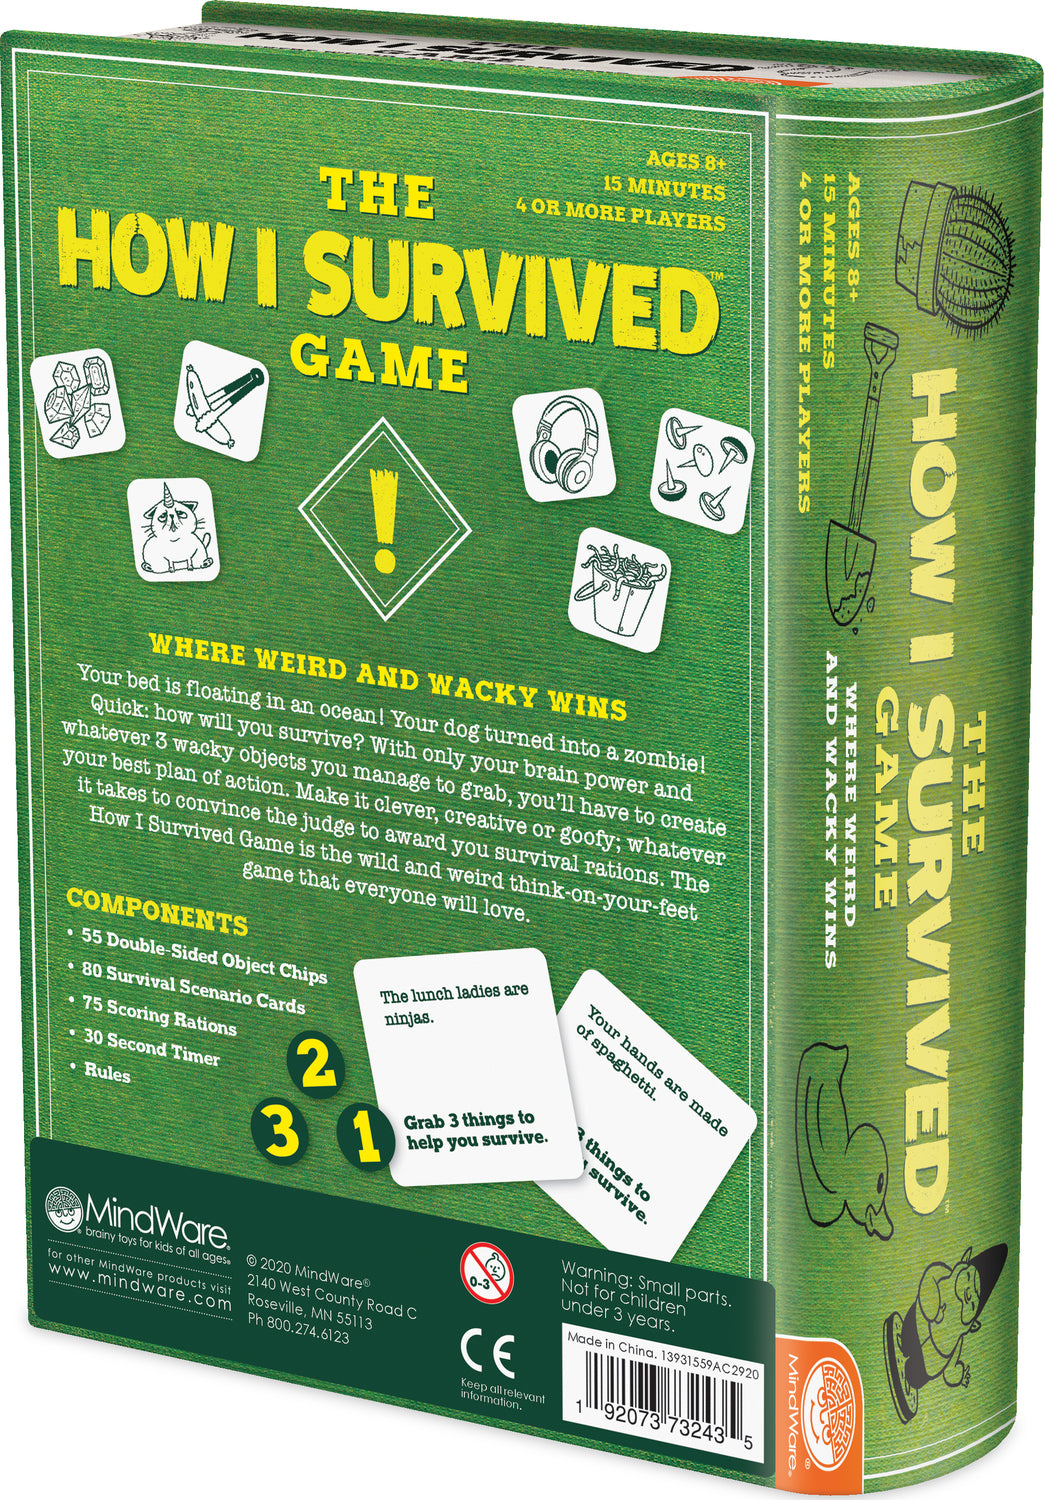 THE HOW I SURVIVED GAME